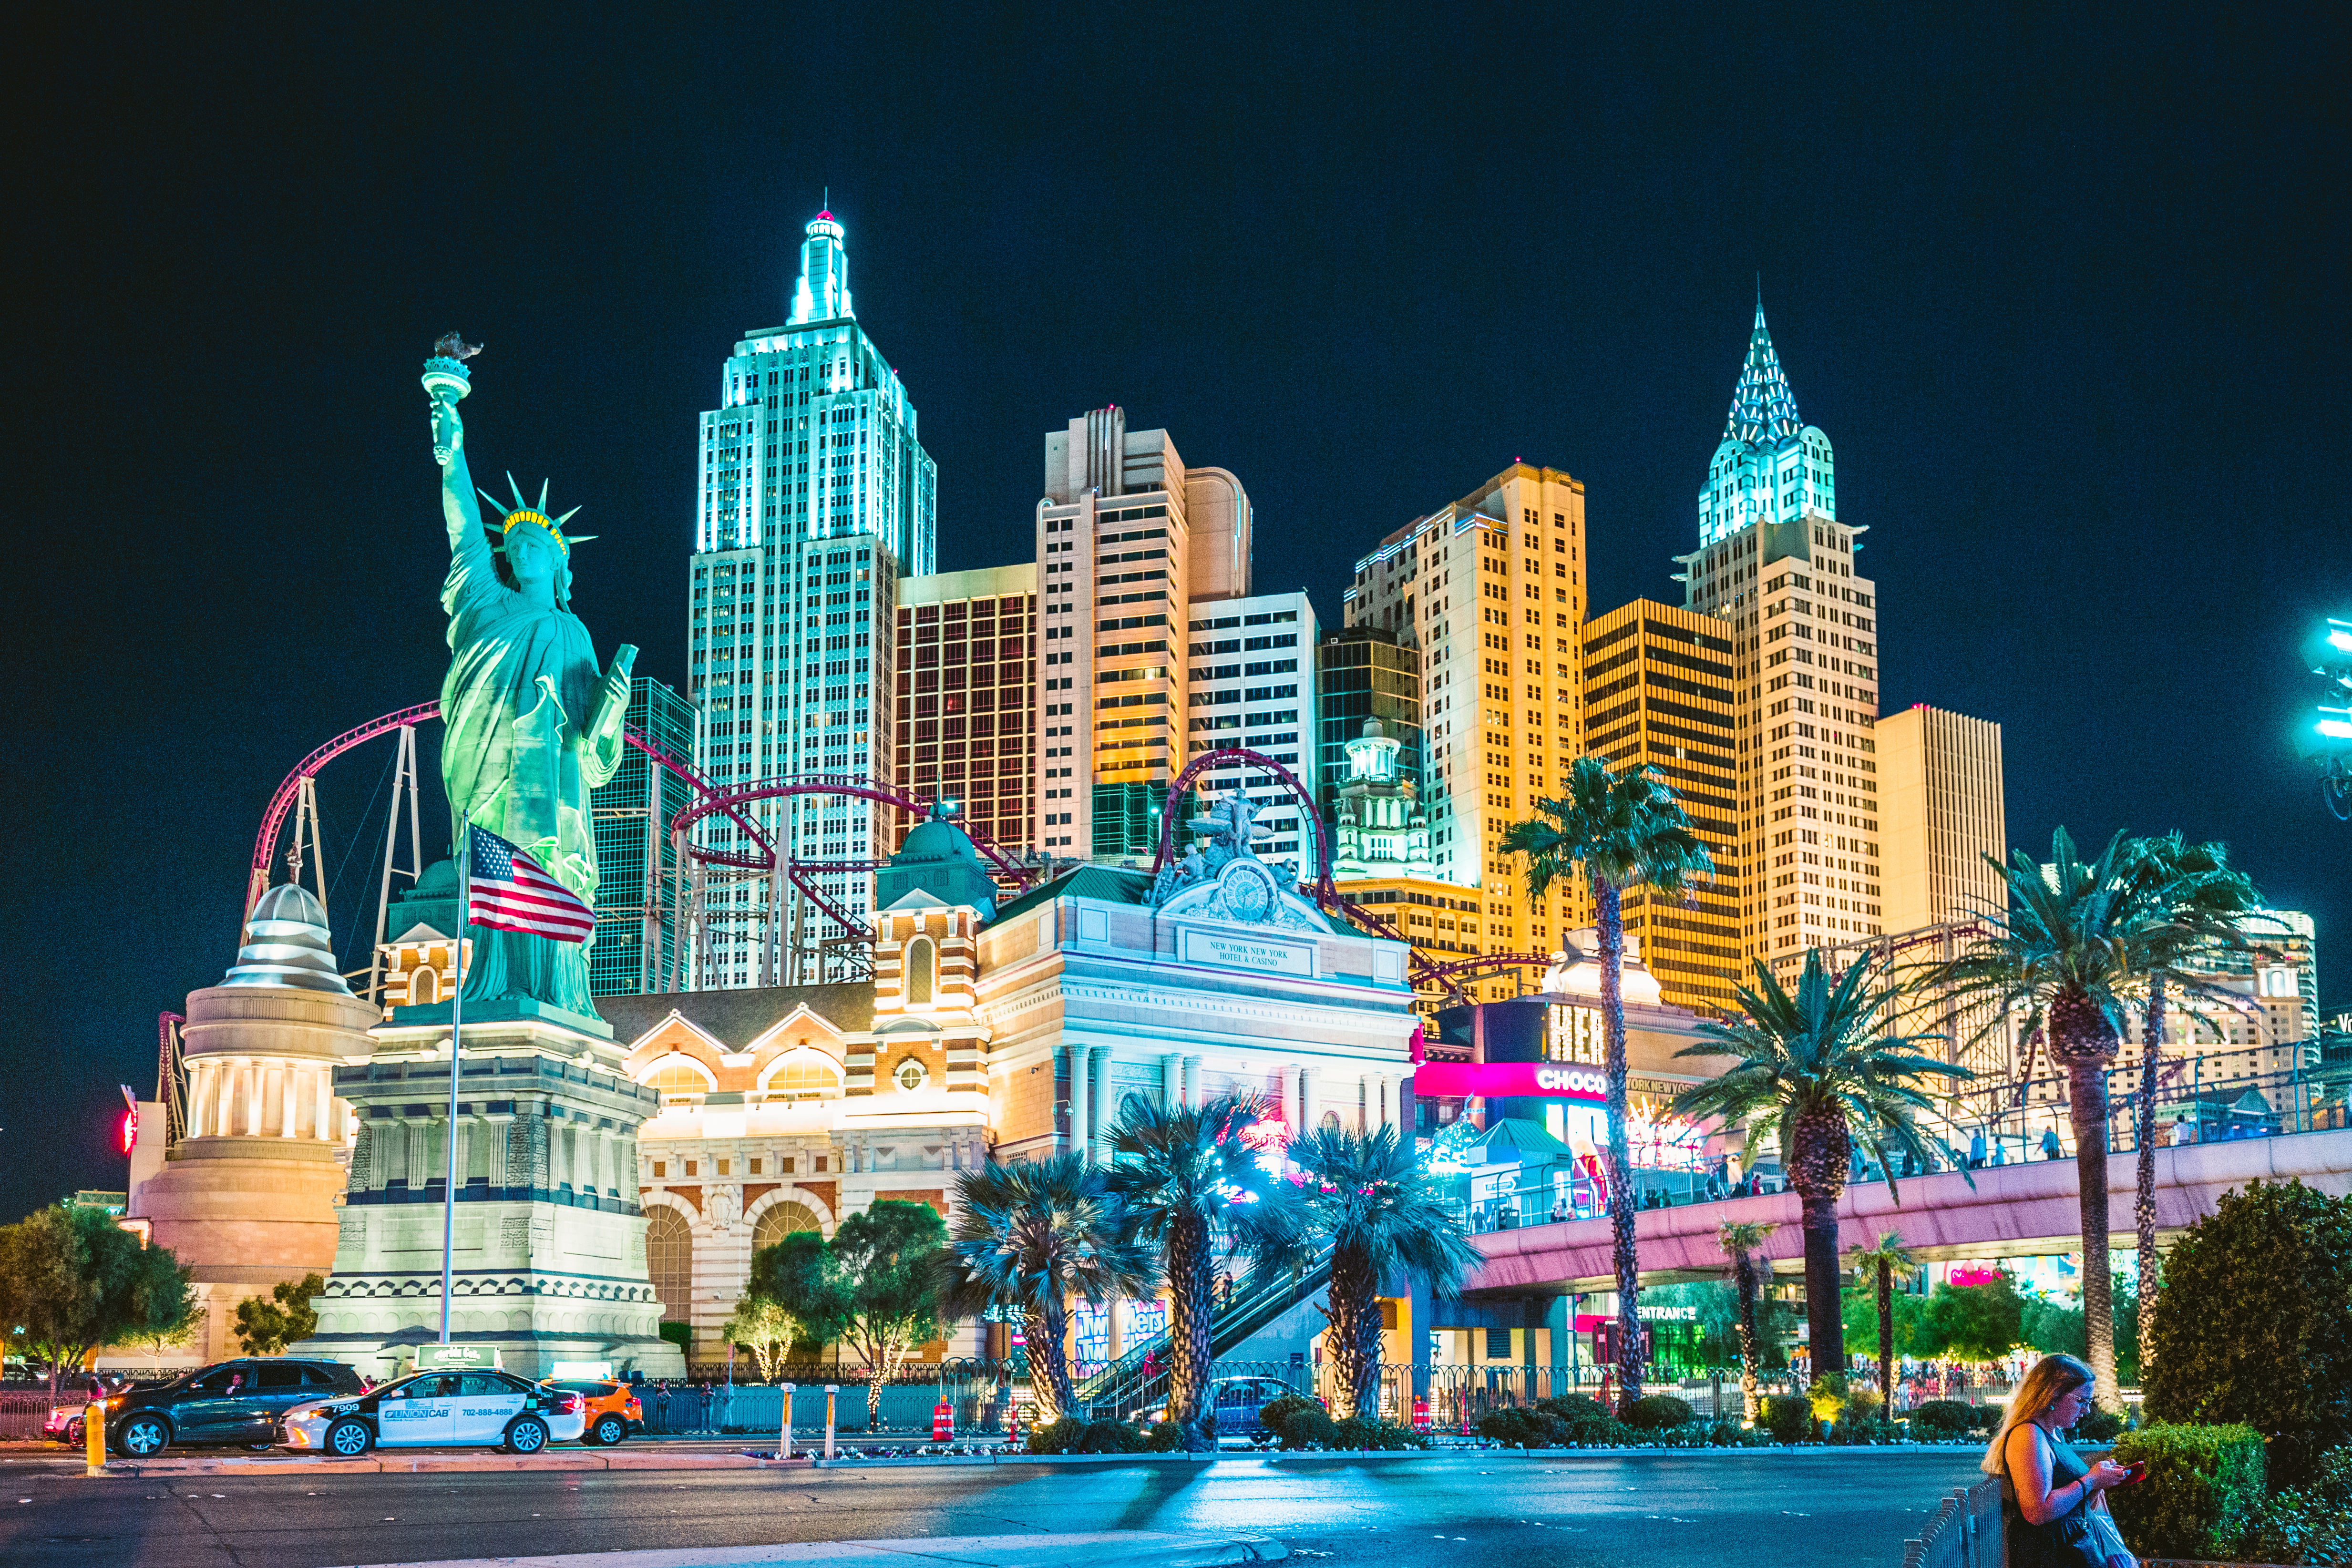 Colourful Las Vegas is known for its gambling but has plenty to offer beyond casinos